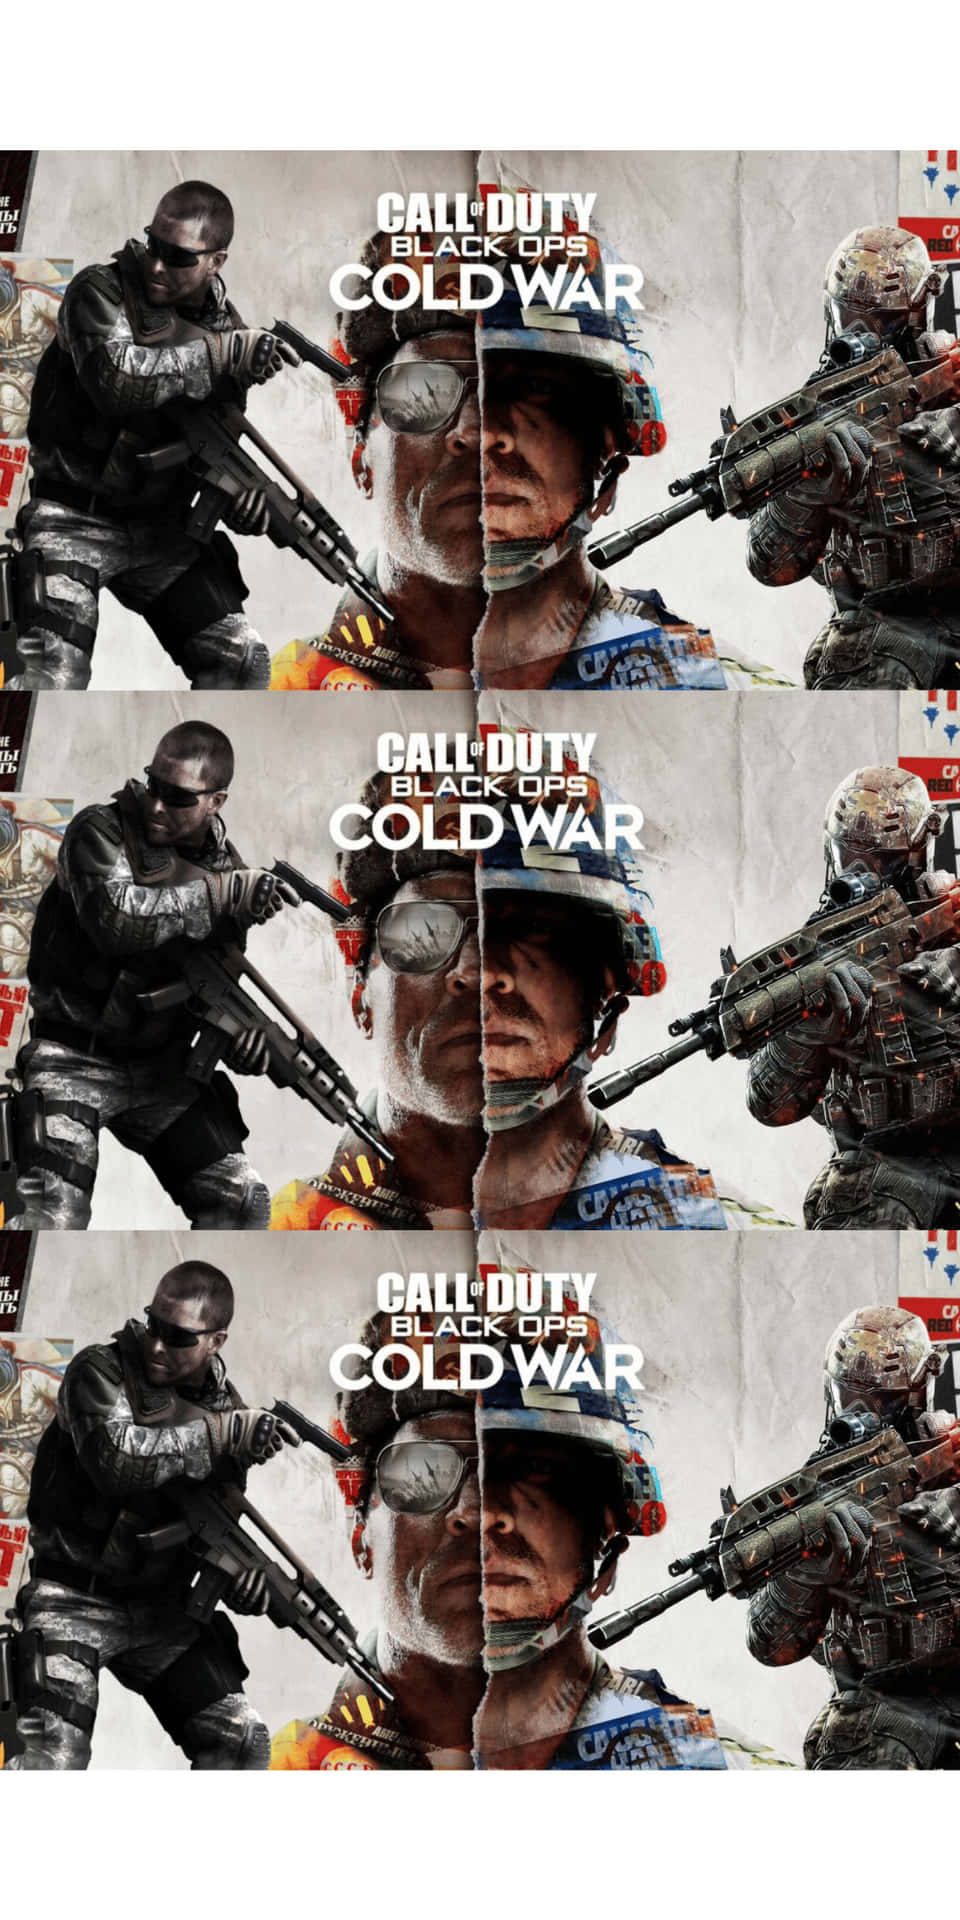 Cover Photo Pixel 3 Call Of Duty Black Ops Cold War Background